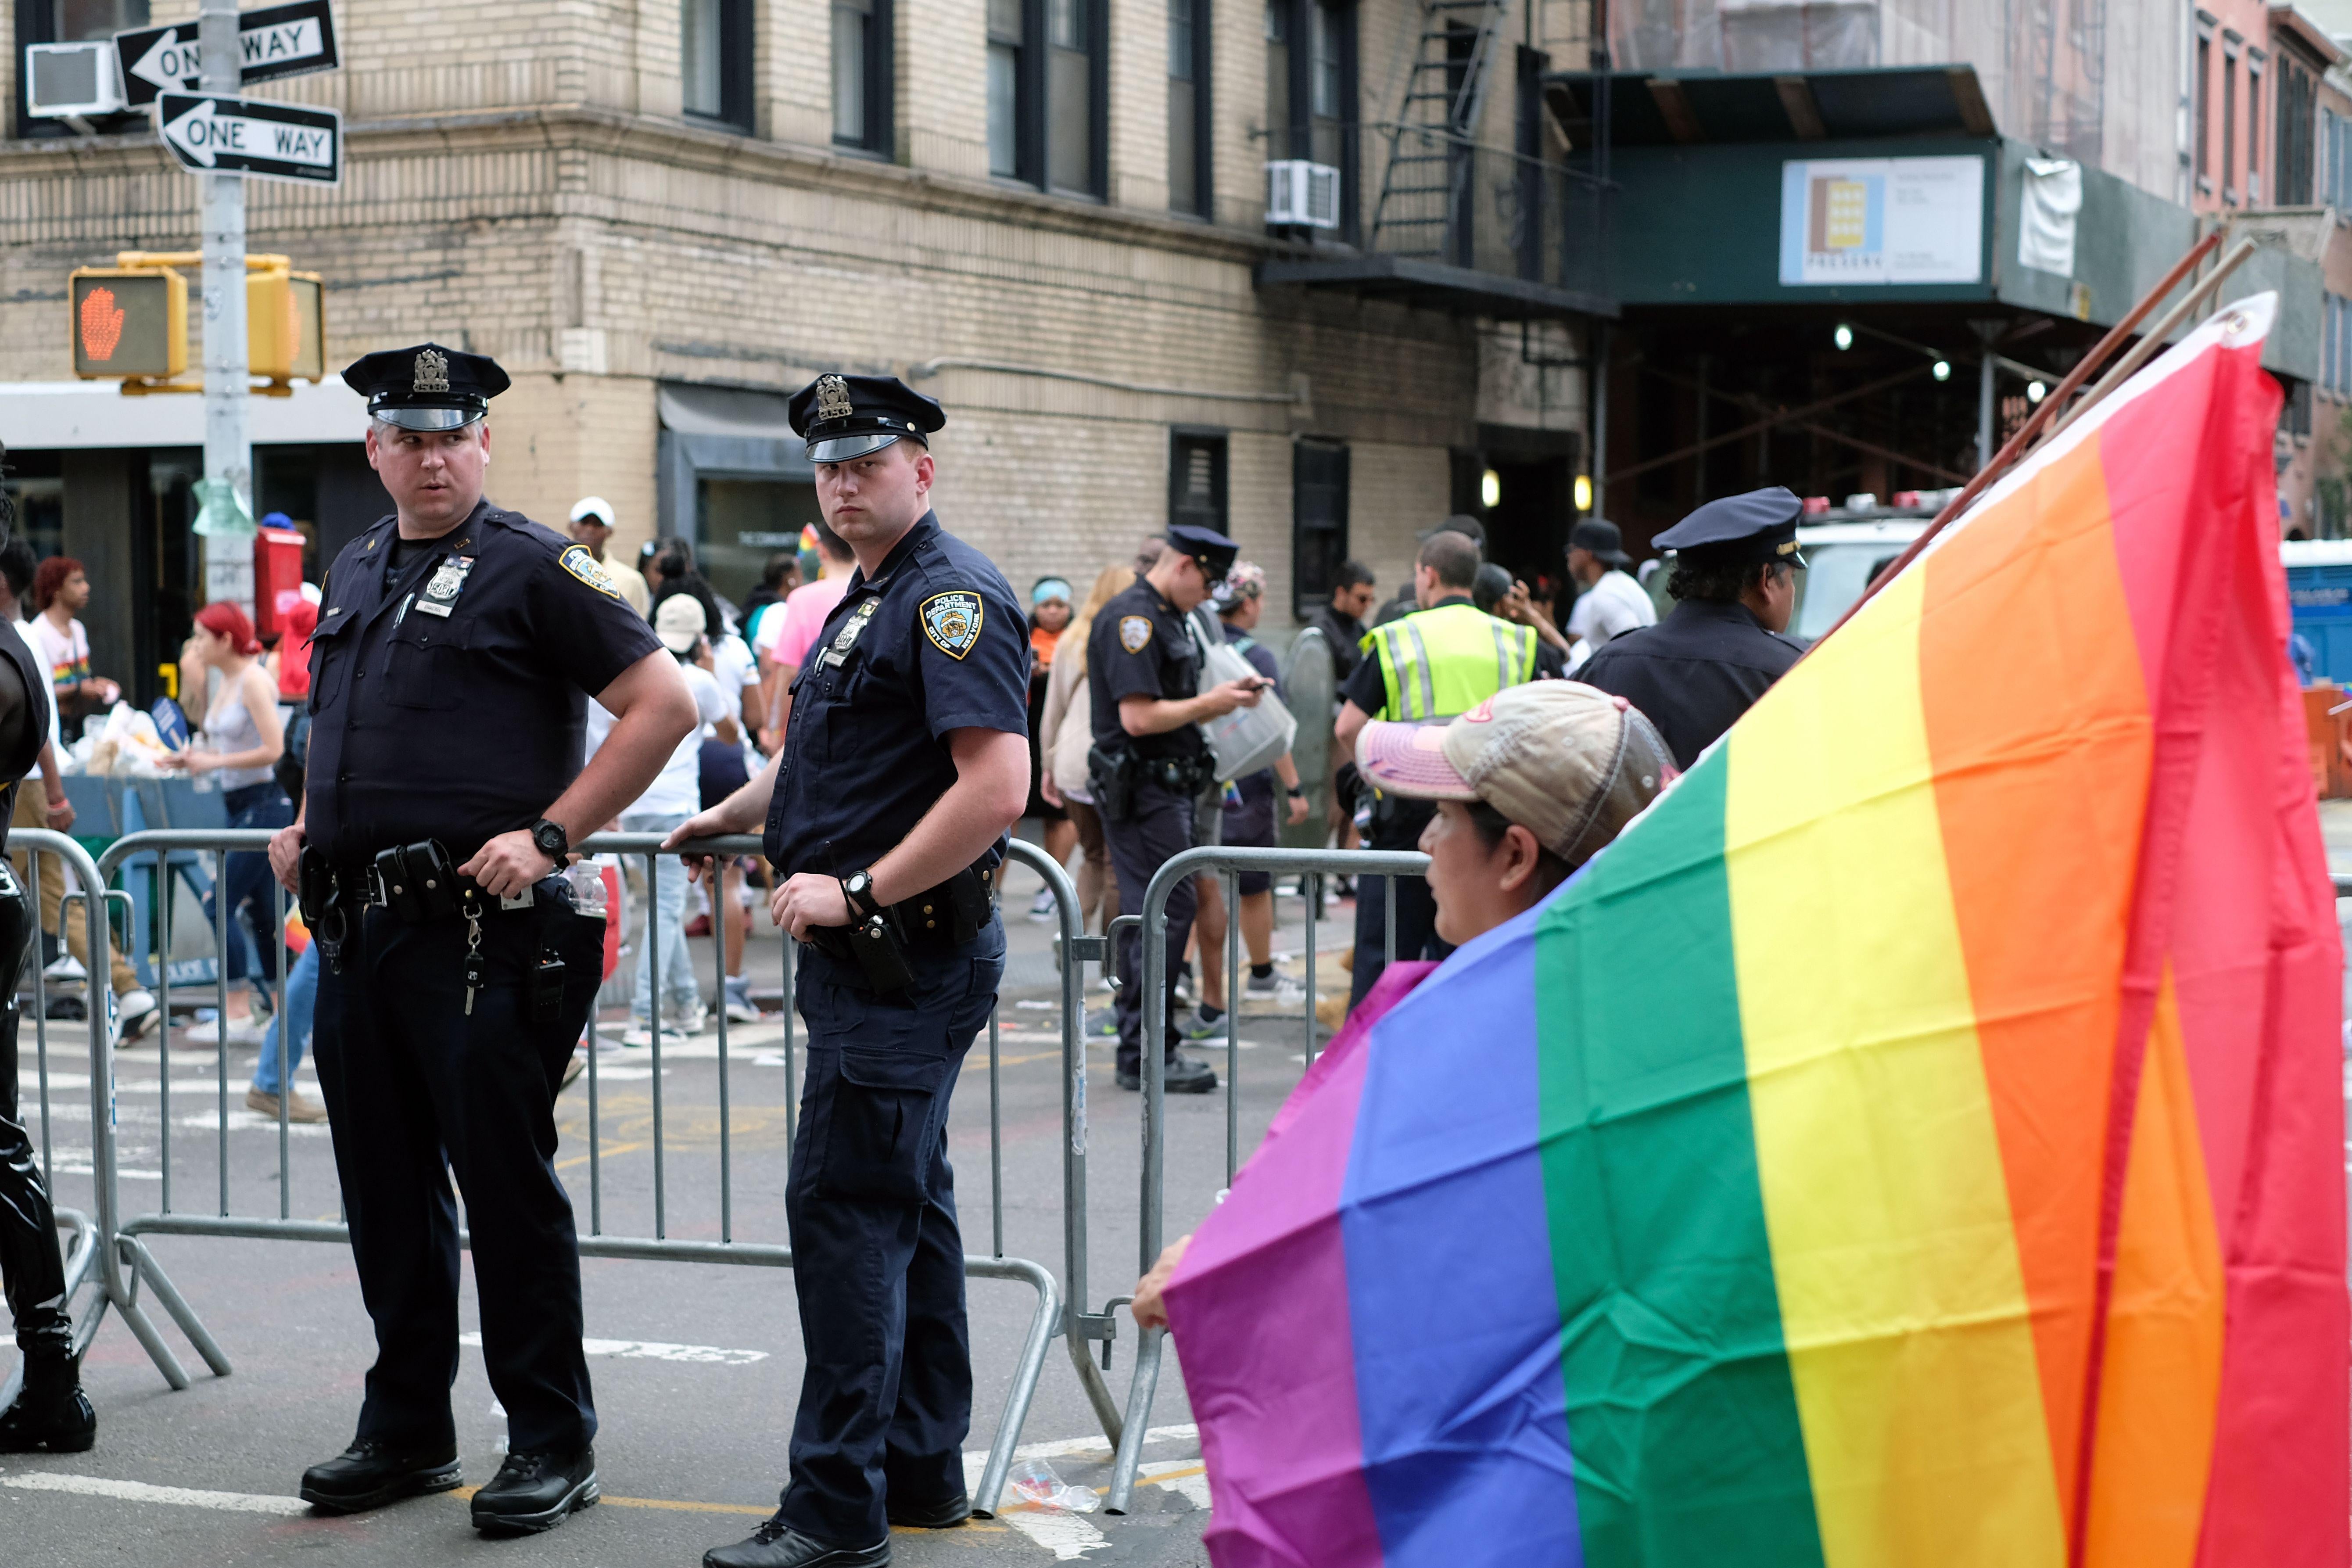 NYPD officers stand near pride flag in streets of New York.